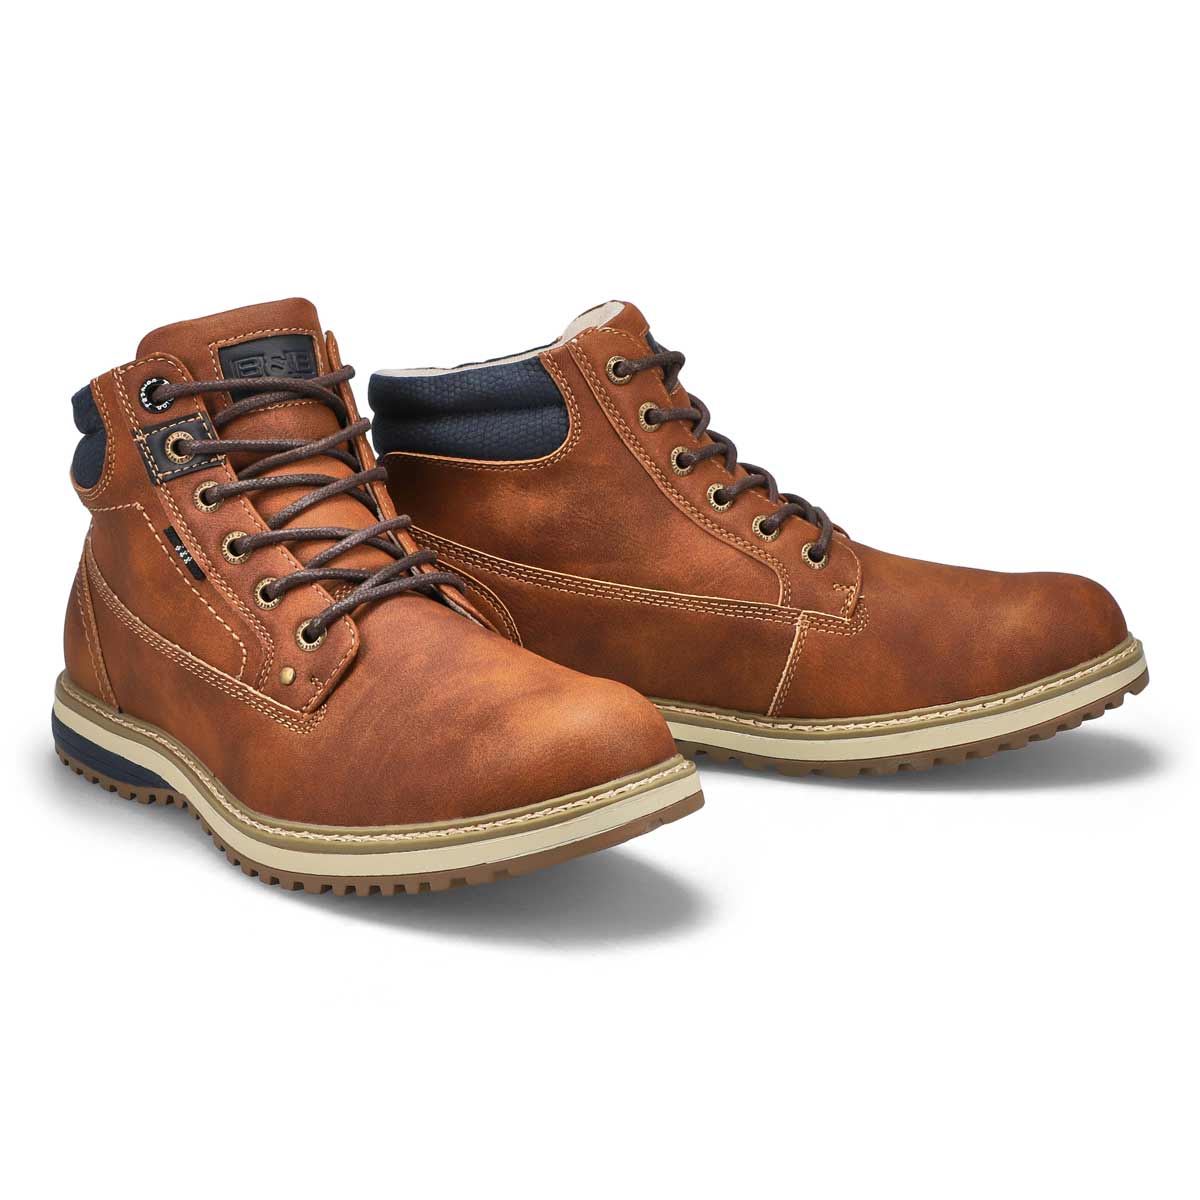 Men's Tractor Lace Up Ankle Boot - Brown